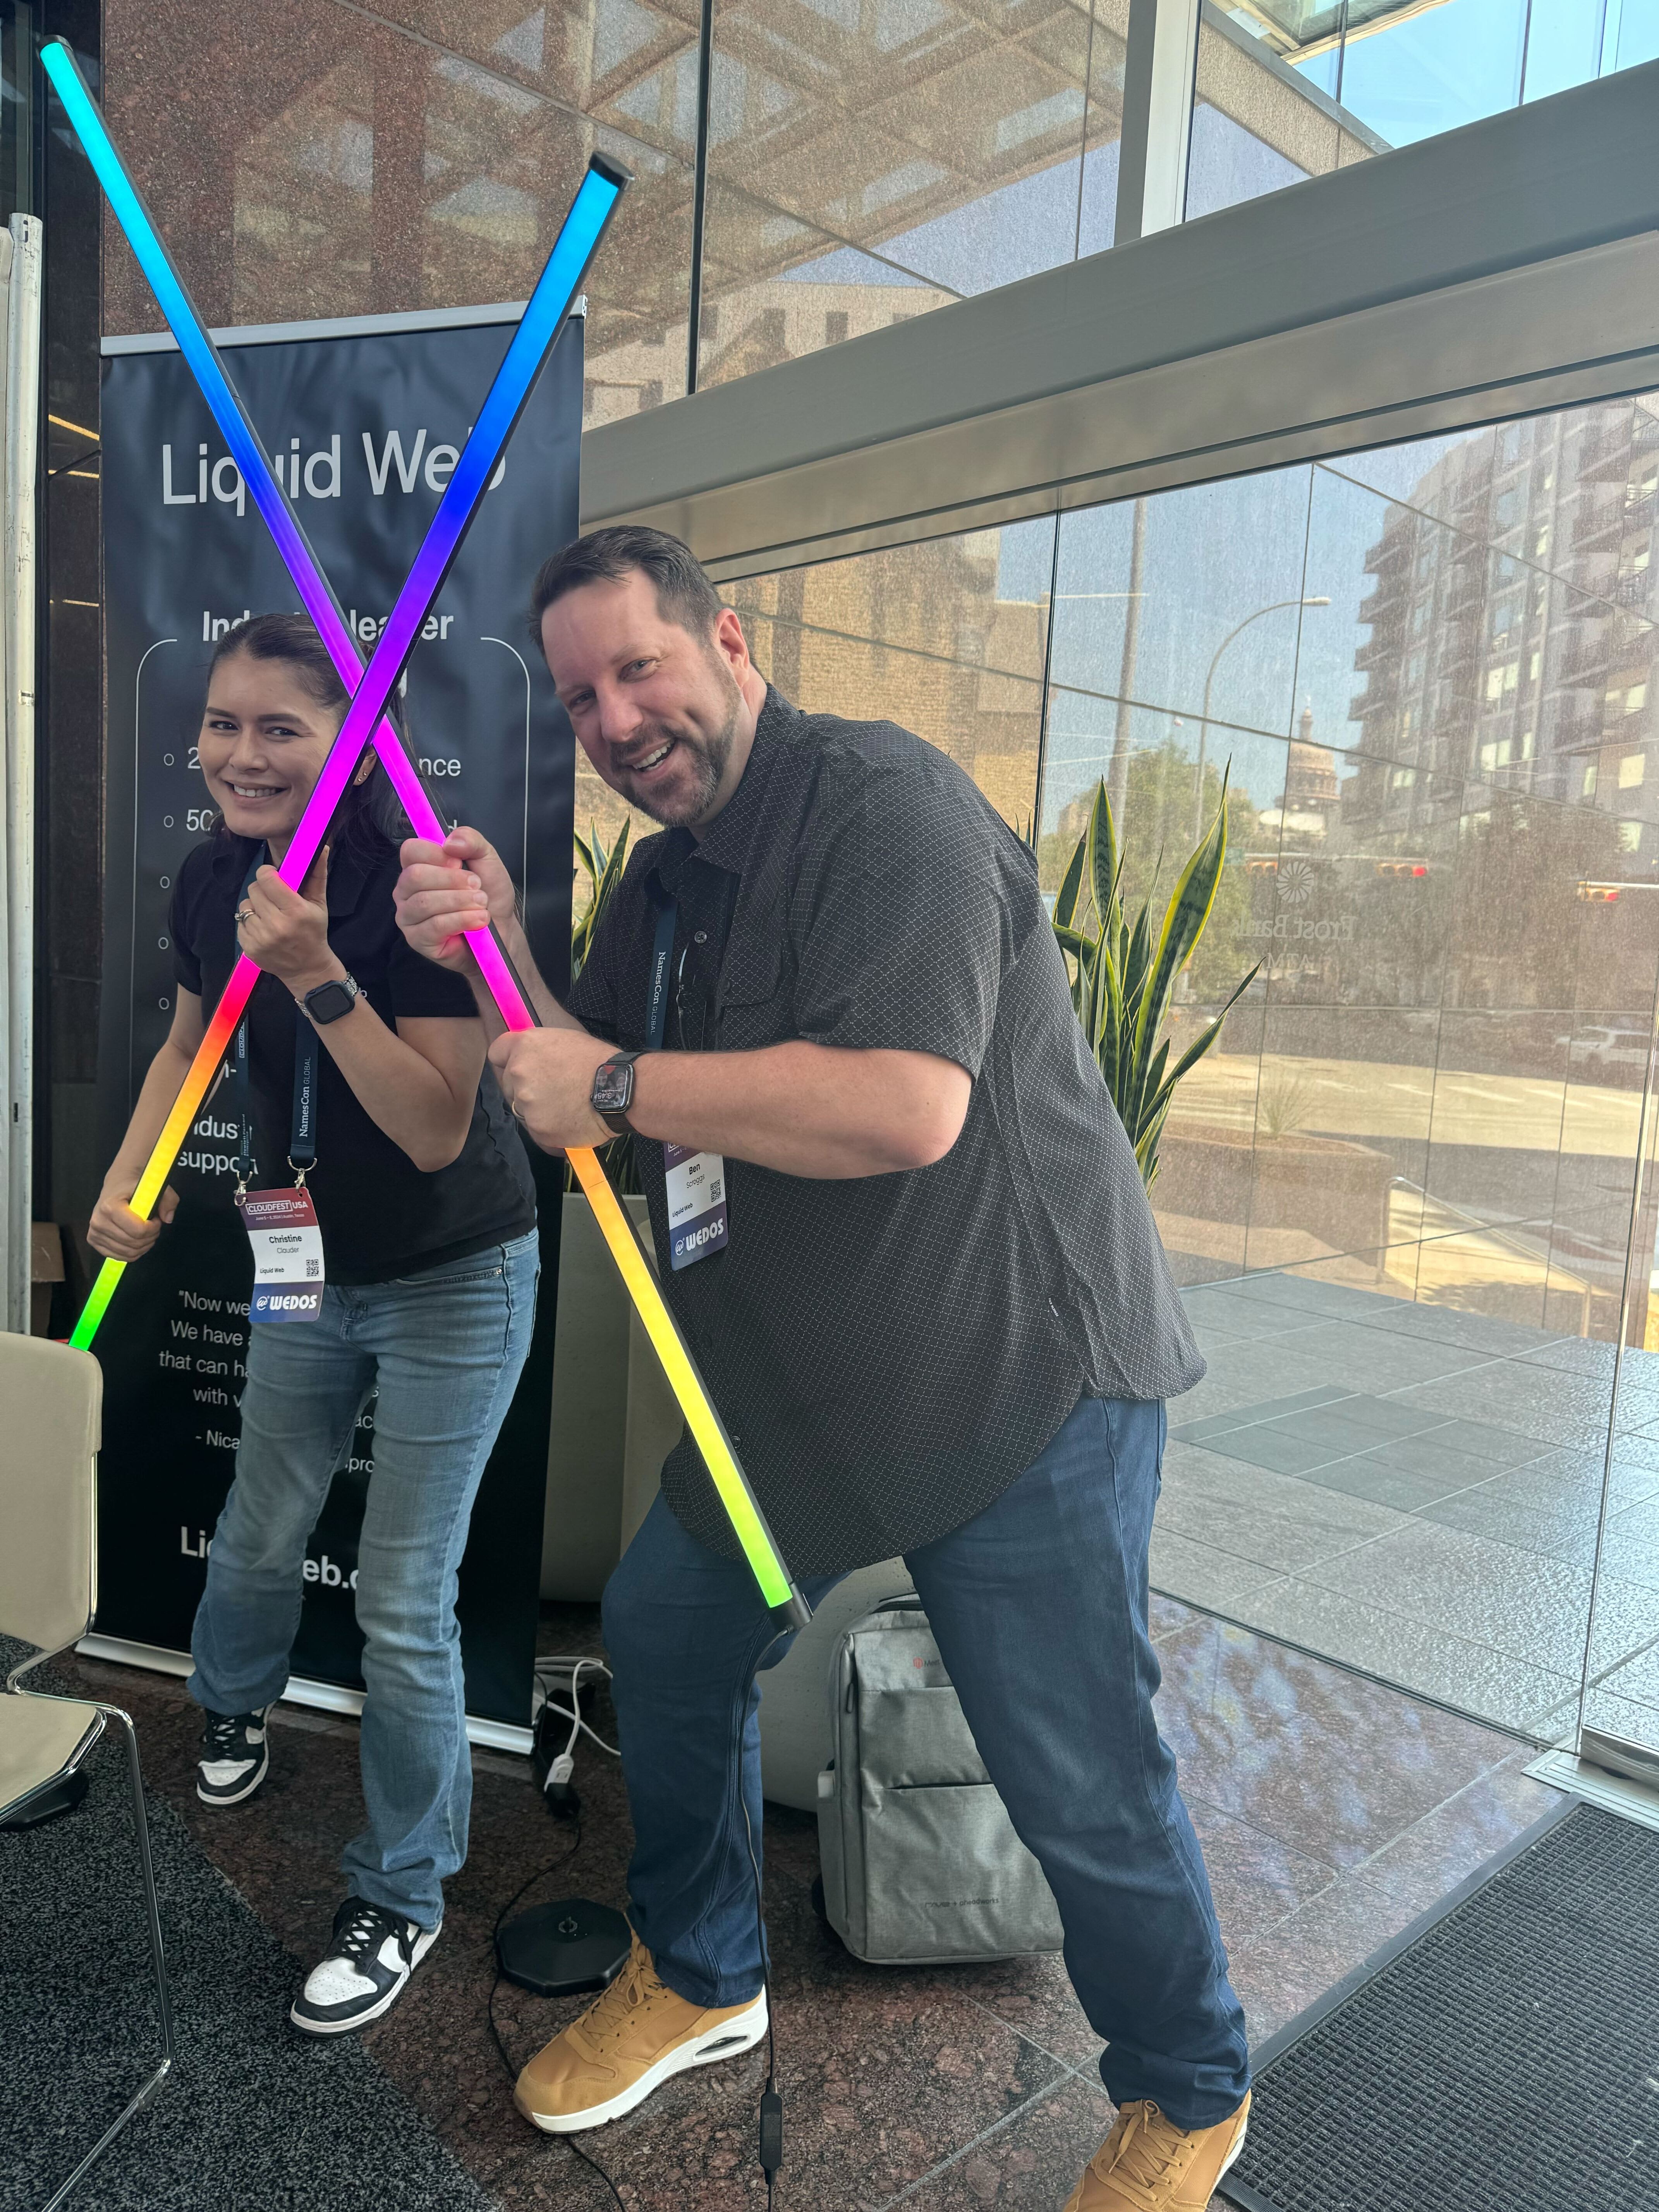 Two members of the Liquid Web field team posing with rainbow lights in front of their booth